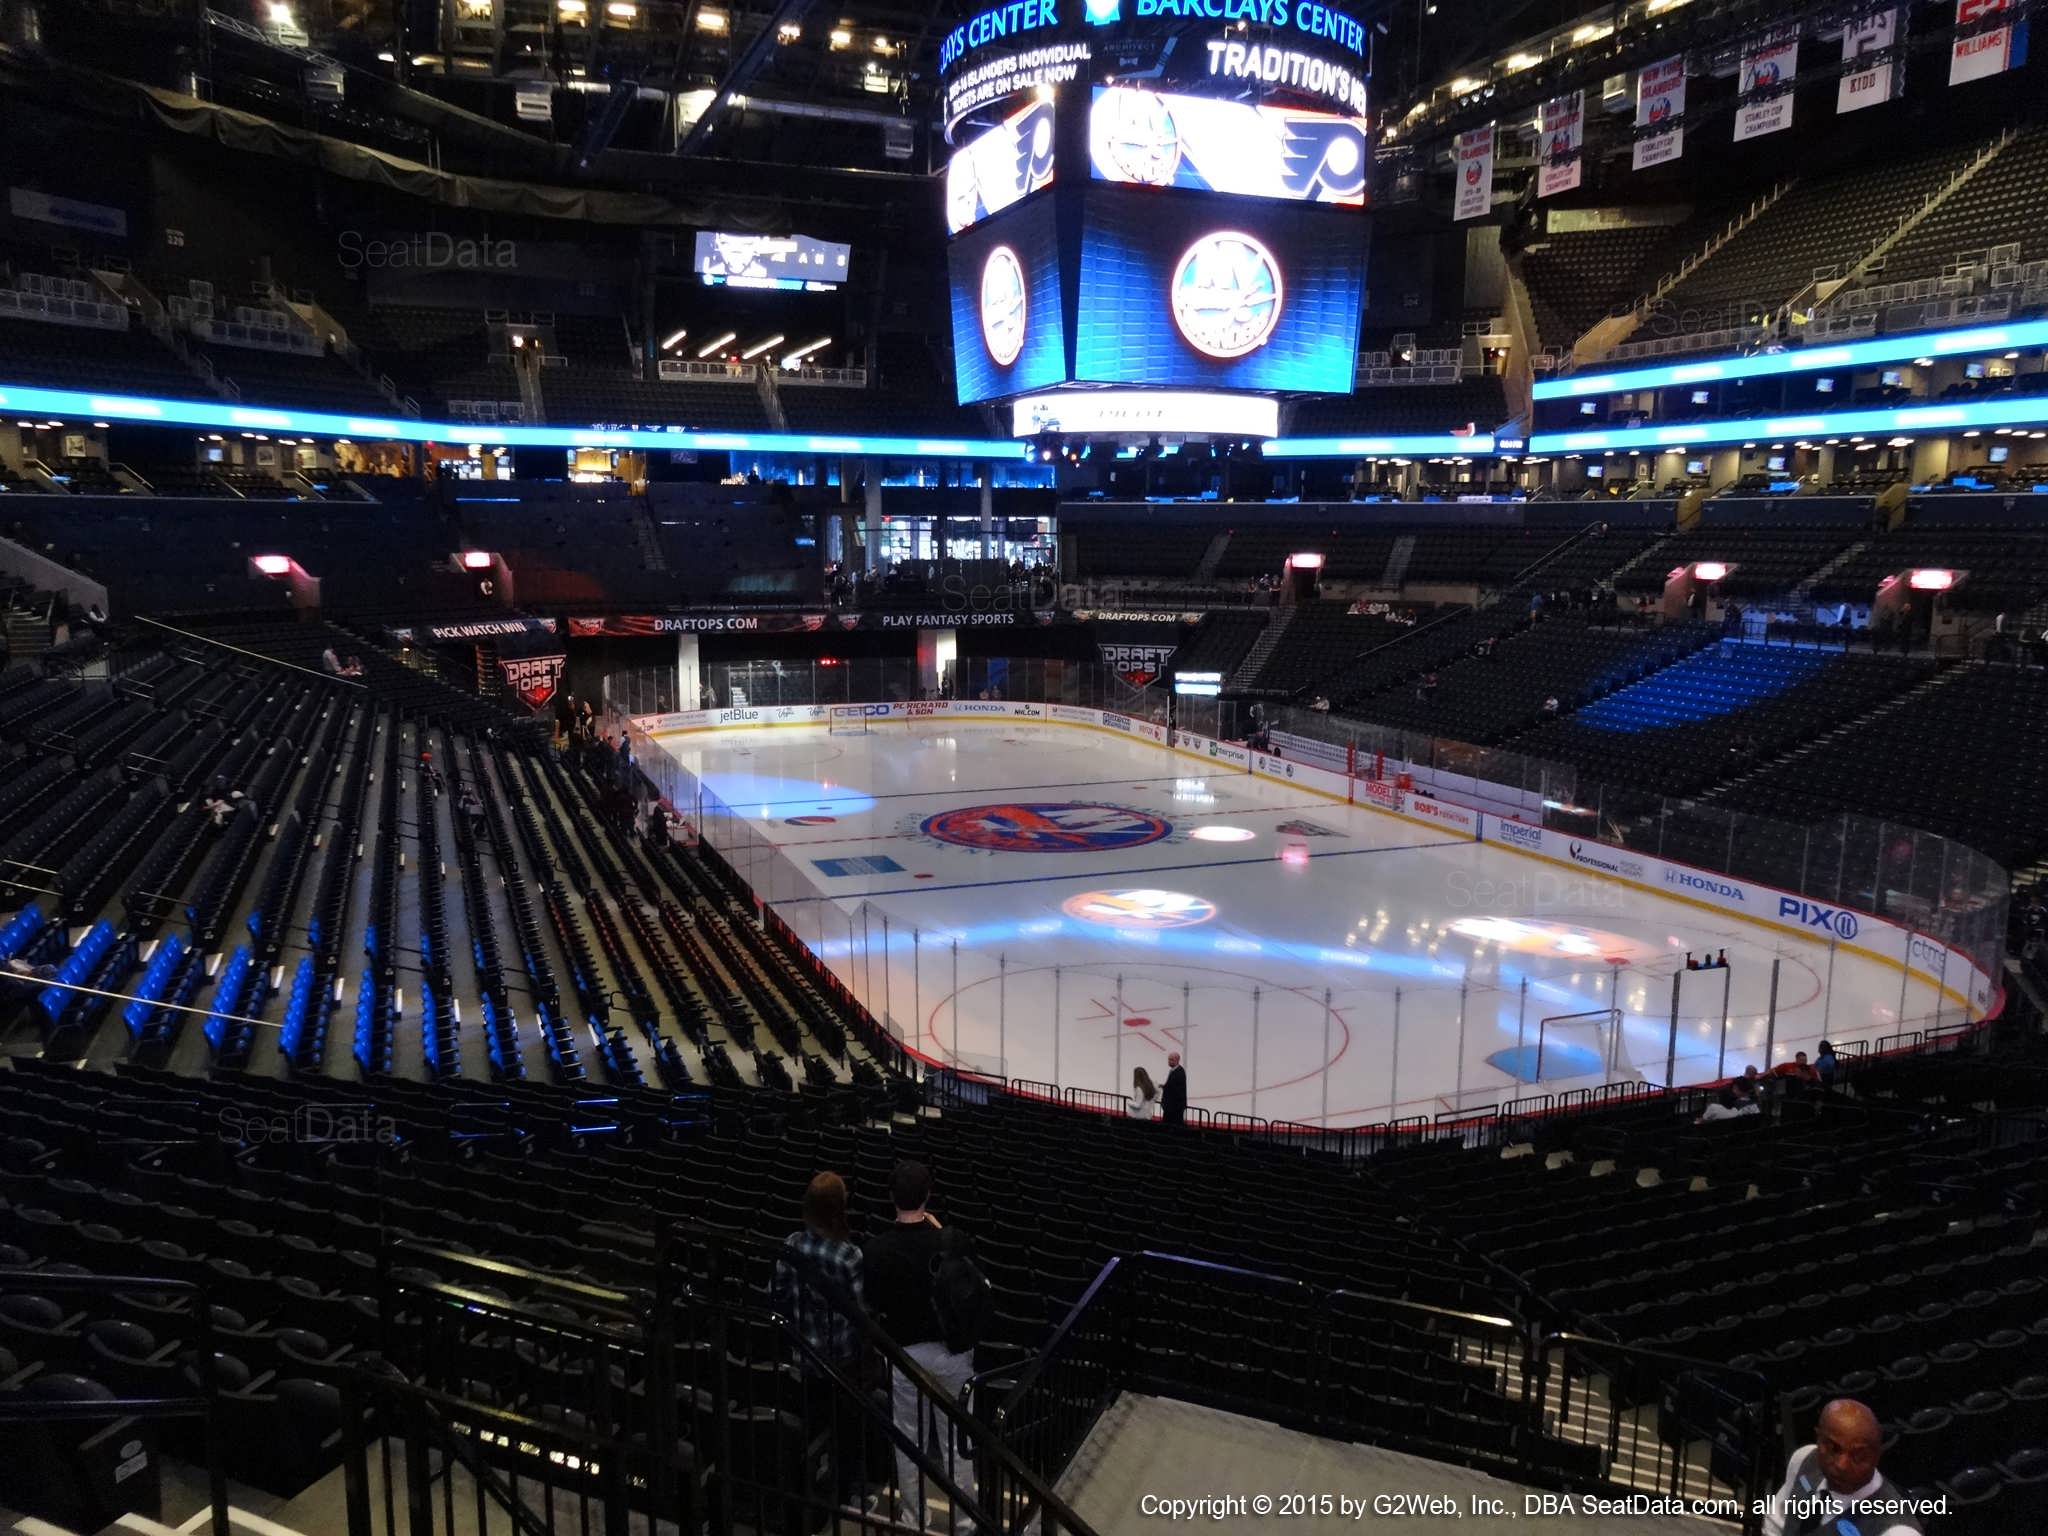 Seat View from Section 118 at the Barclays Center, home of the New York Islanders